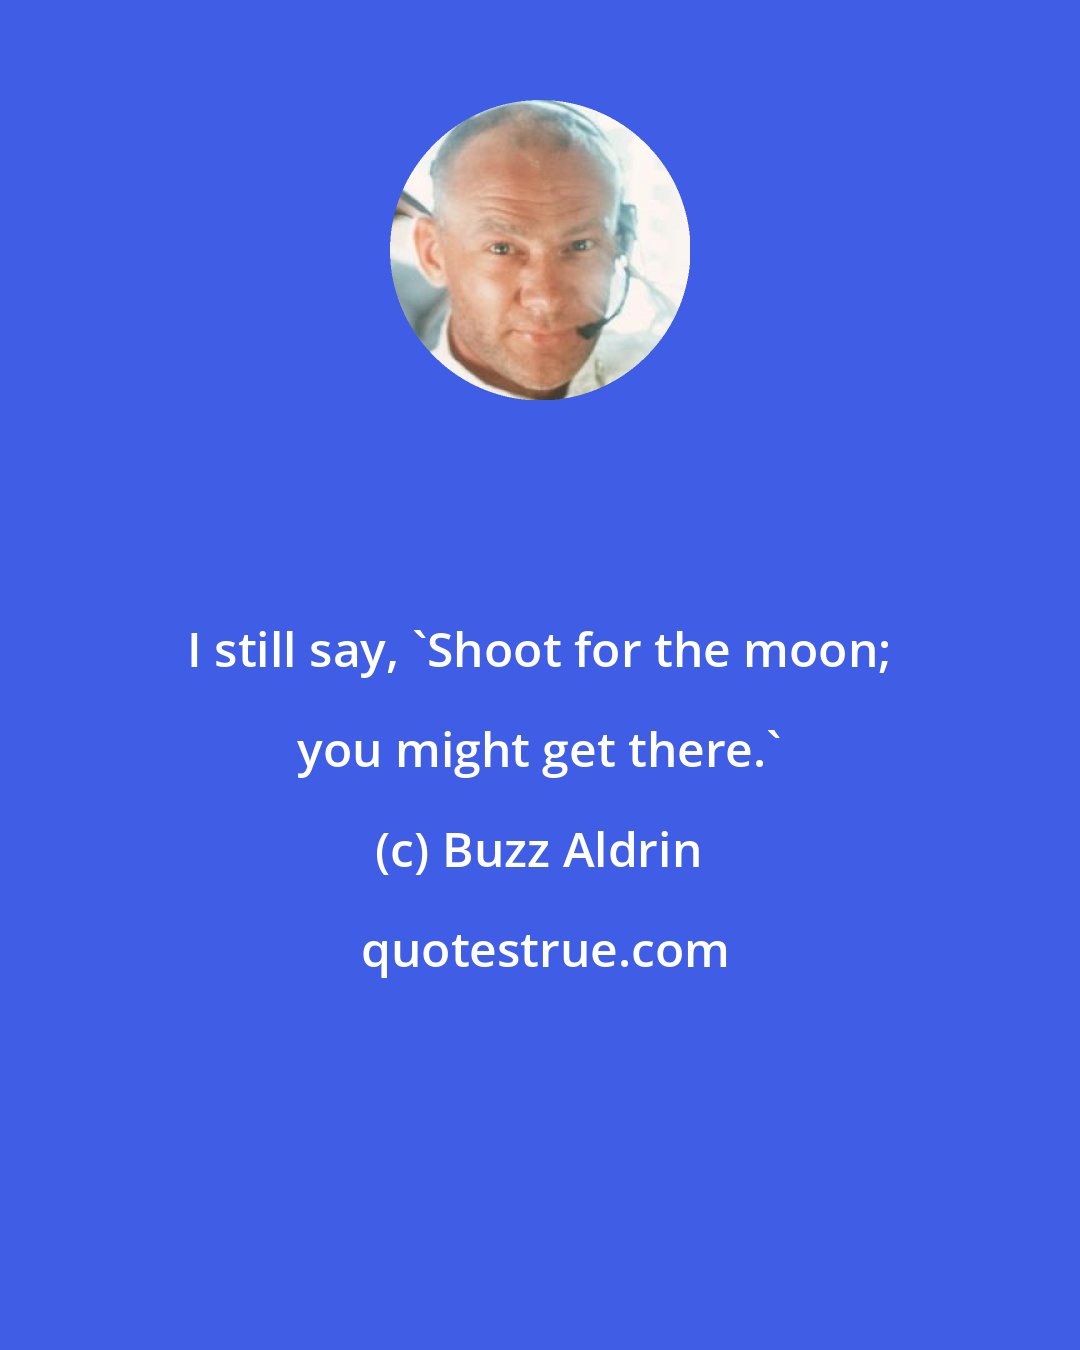 Buzz Aldrin: I still say, 'Shoot for the moon; you might get there.'